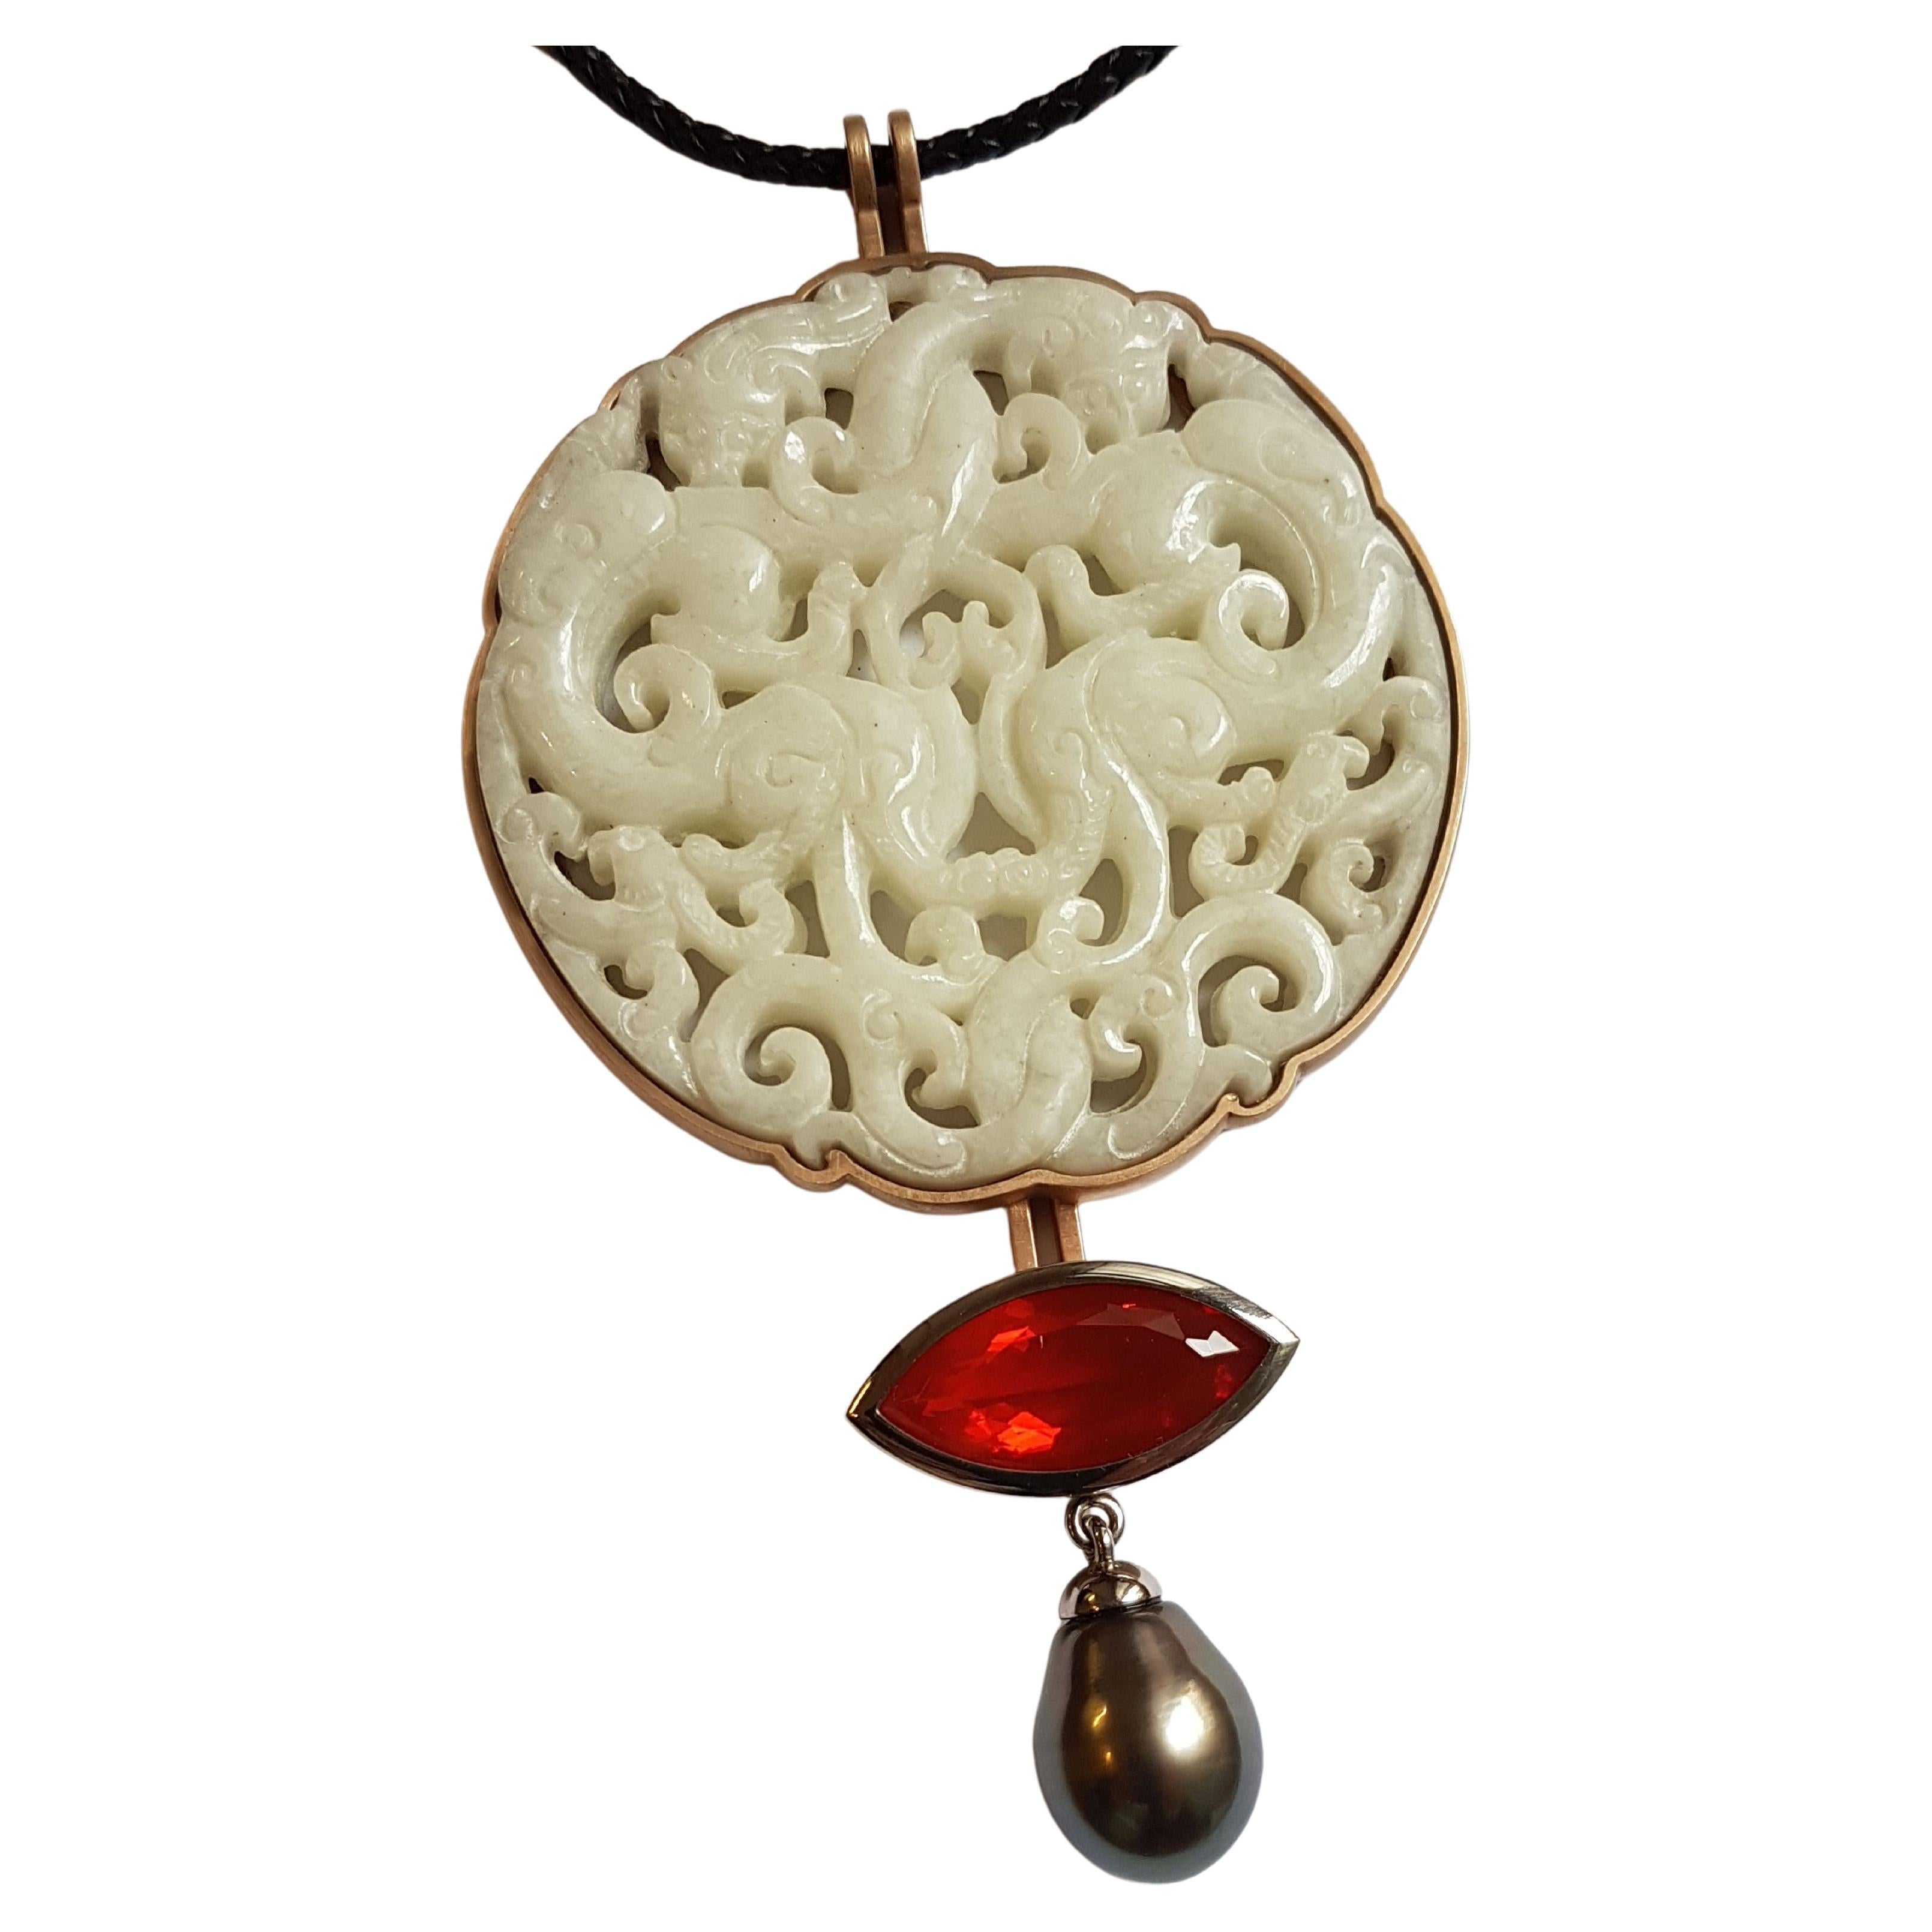 Elegant and casual at the same time - this beautiful necklace leaves nothing to be desired.
The white openworked historic chinese jade disc is surrounded by bronze and on the bottom complemented with a radiant 10.88 carat mexican fire opal navette